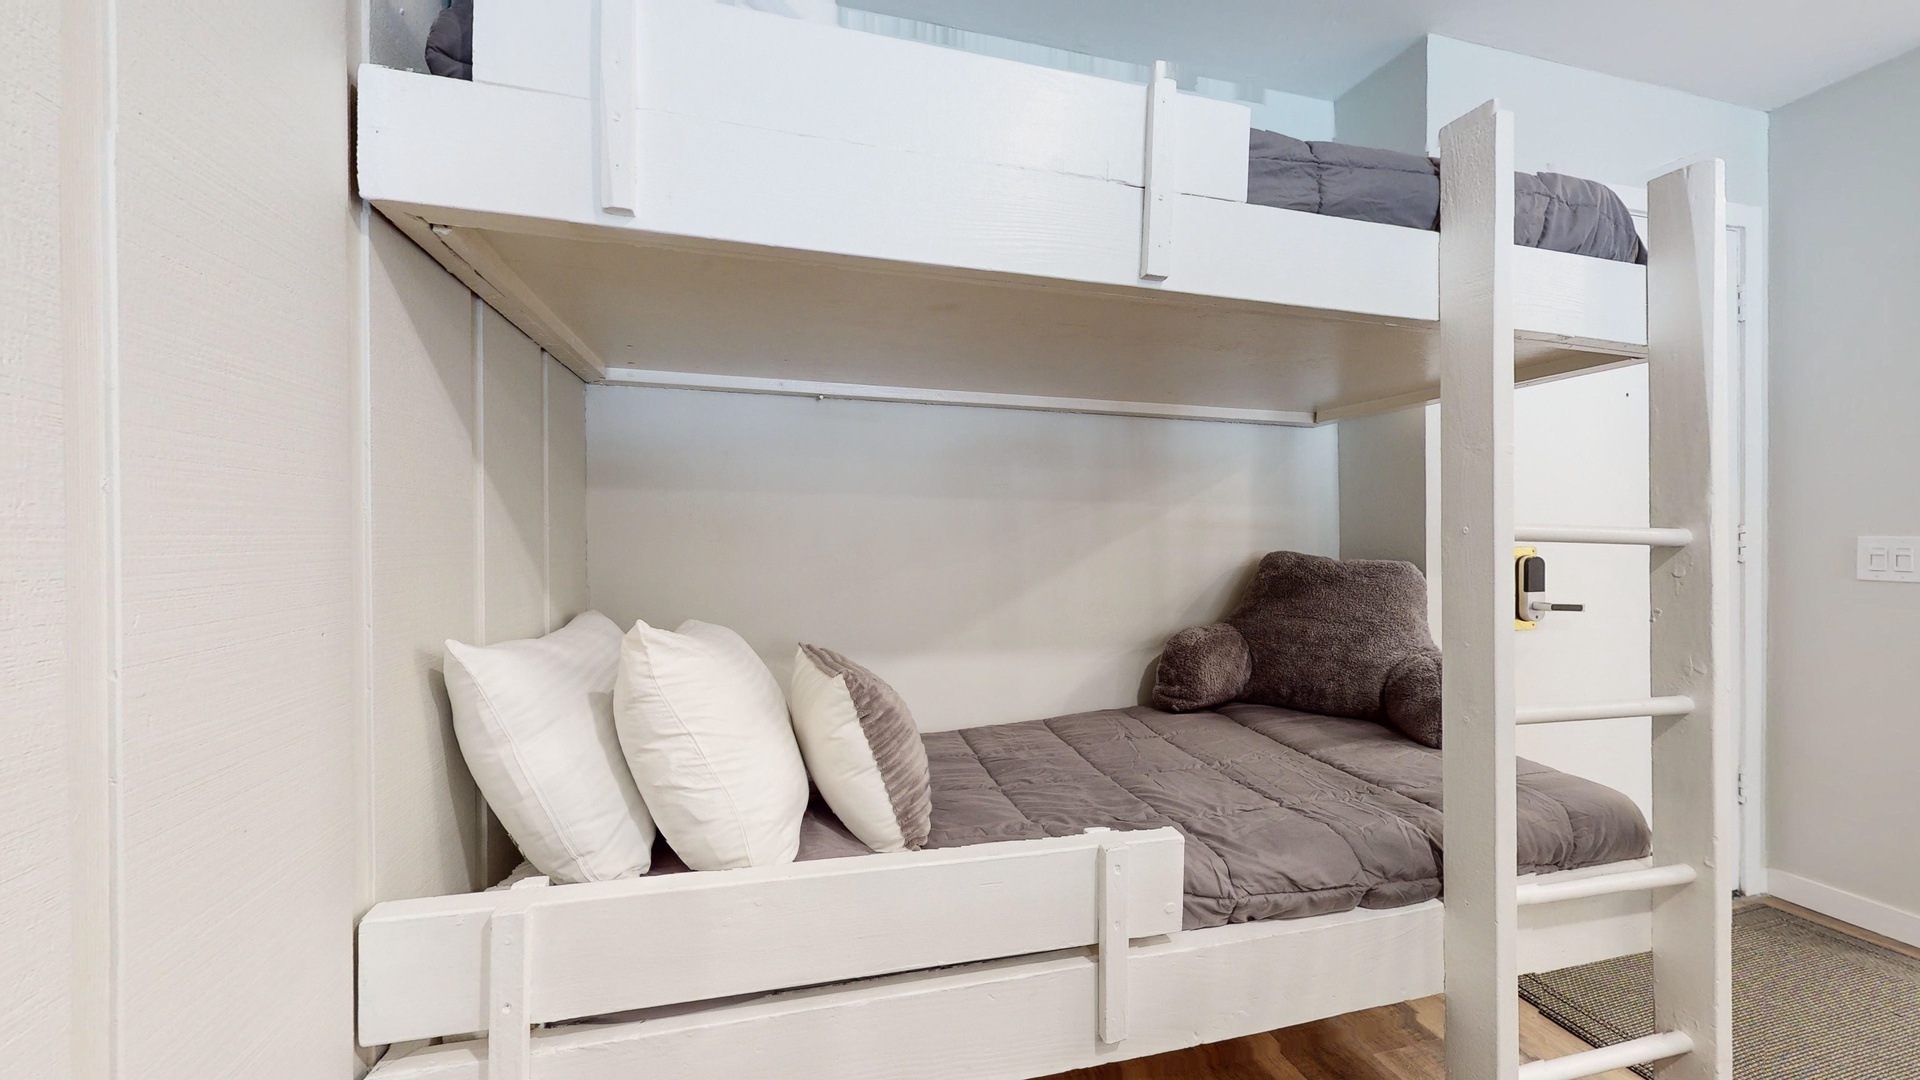 Enjoy the whimsical bunk bed nook